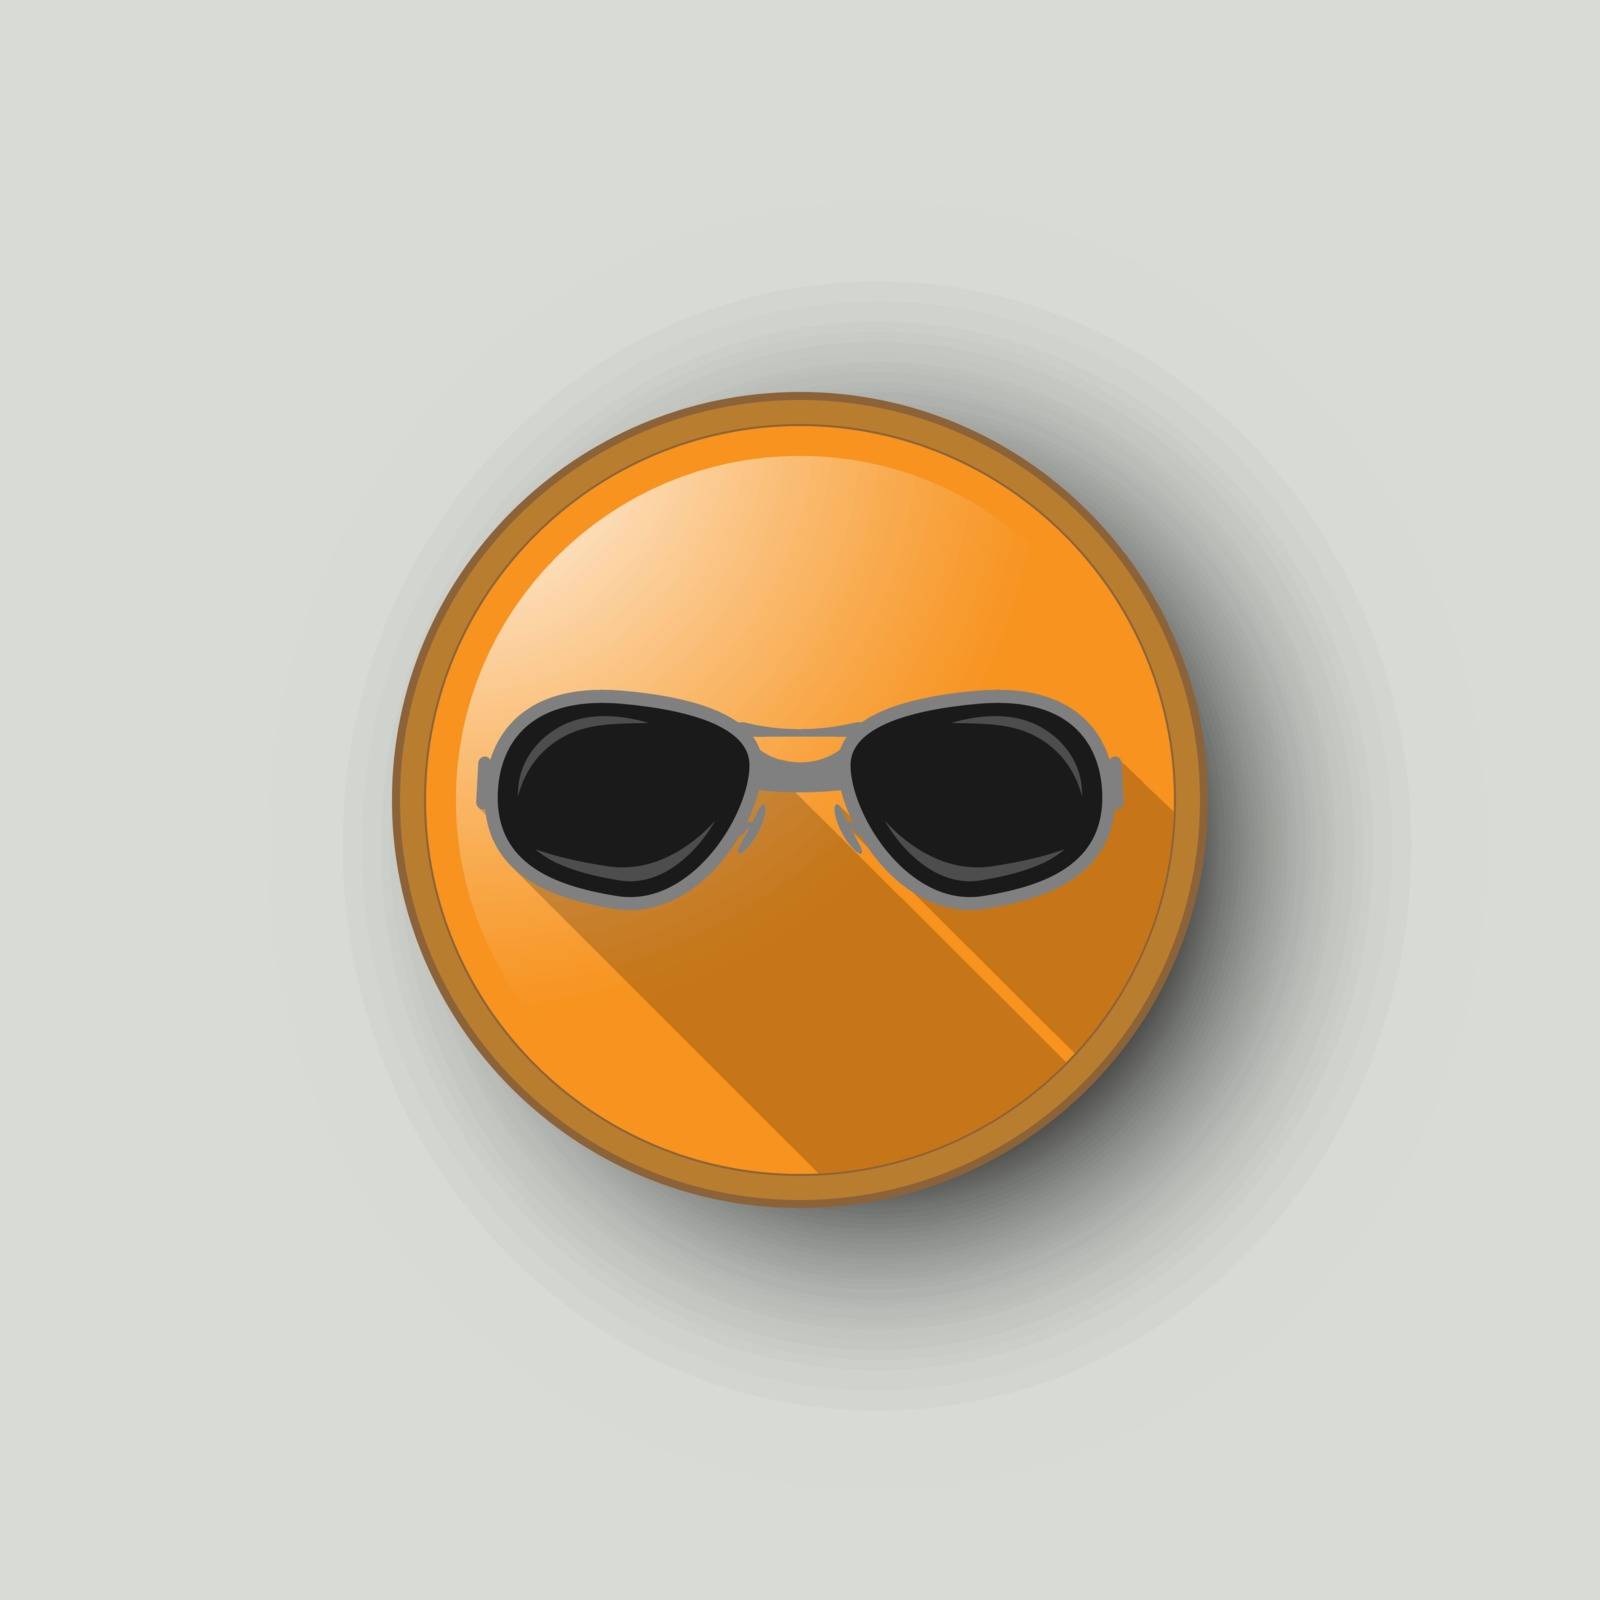 Vector illustration of orange colored circle as the Sun wearing sunglasses emblem.